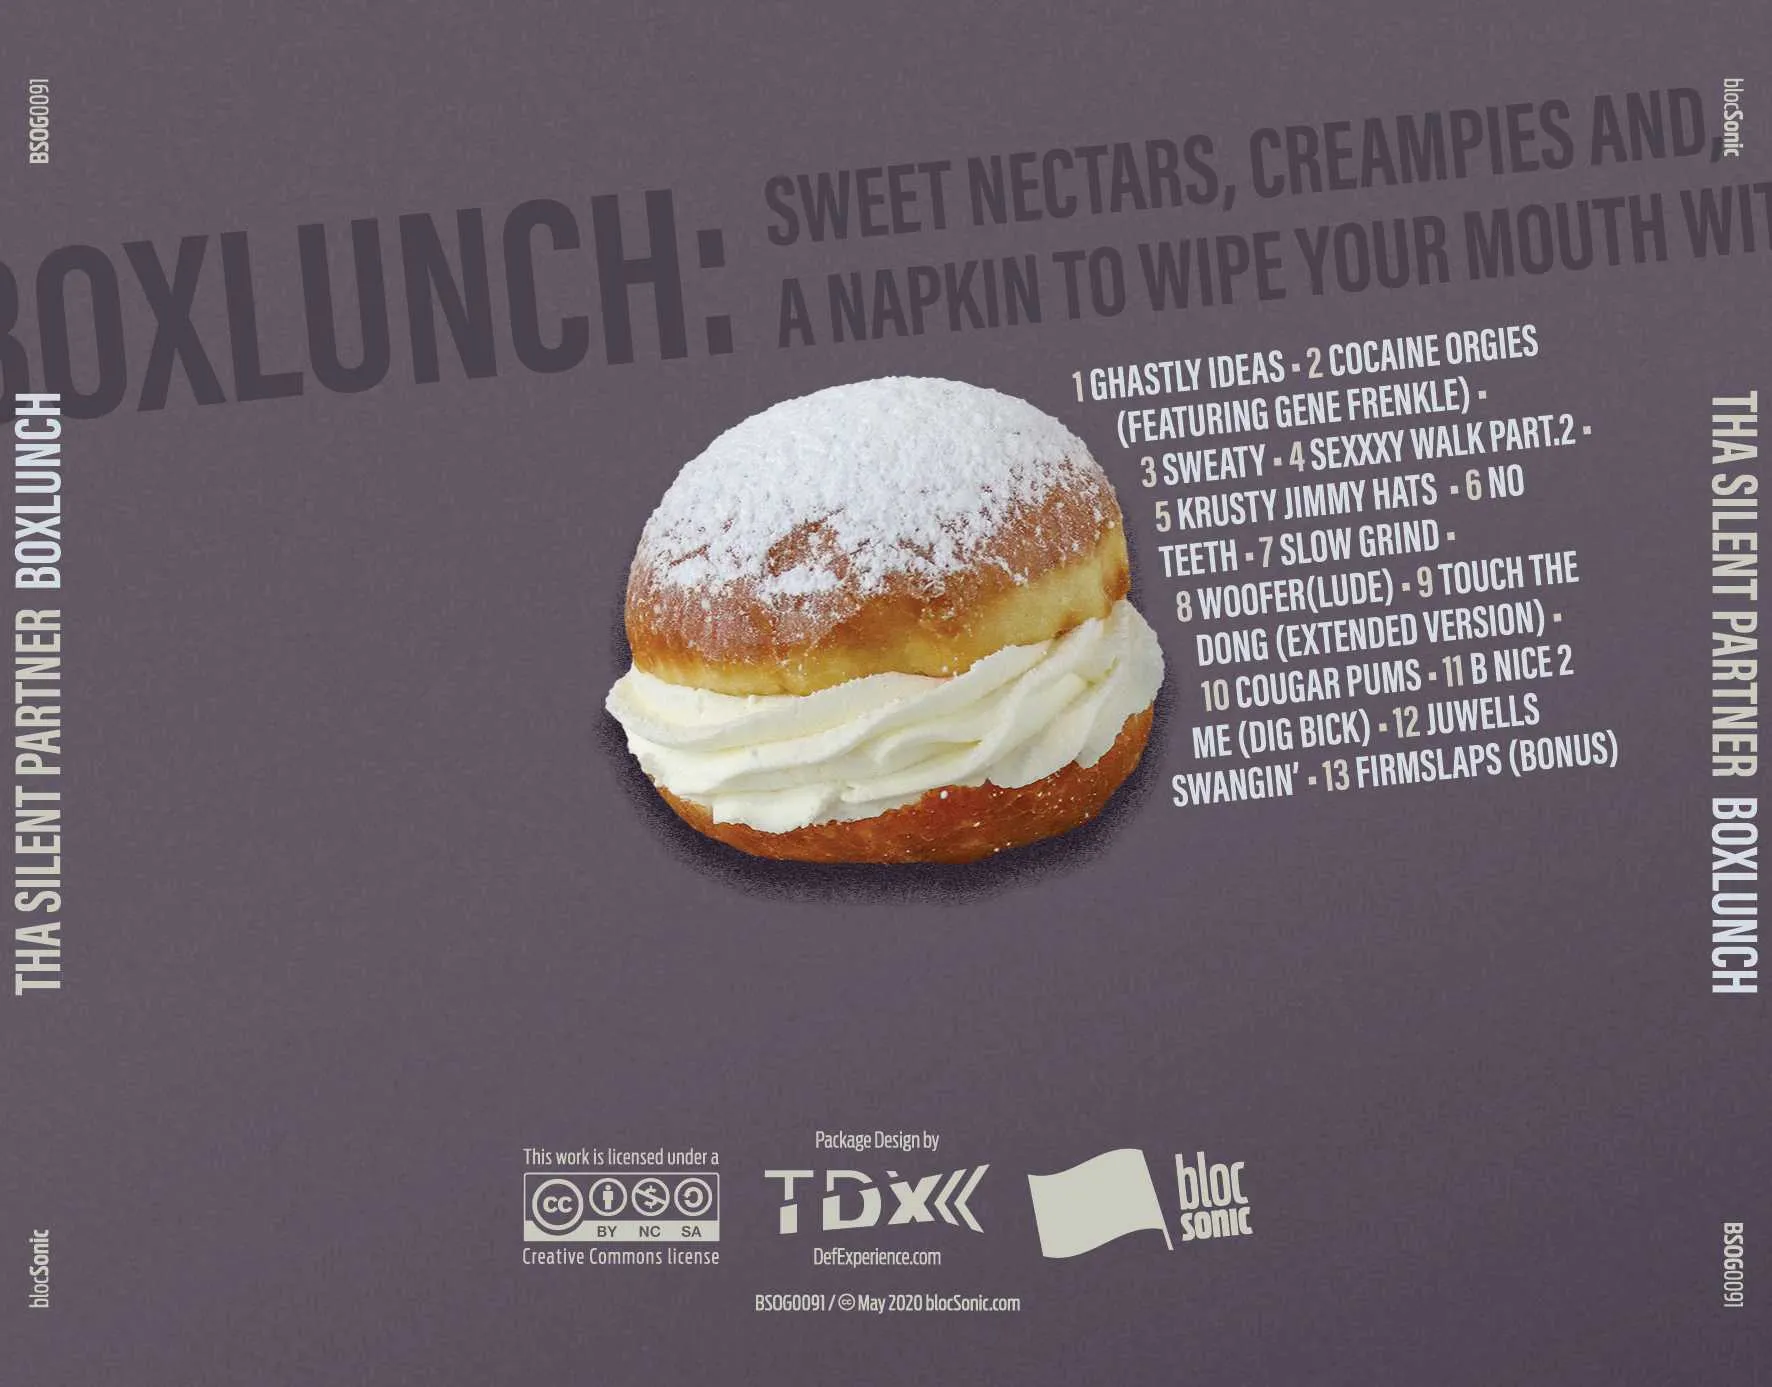 Album traycard for “BOXLUNCH: Sweet Nectars, Creampies And, A Napkin To Wipe Your Mouth With” by Tha Silent Partner